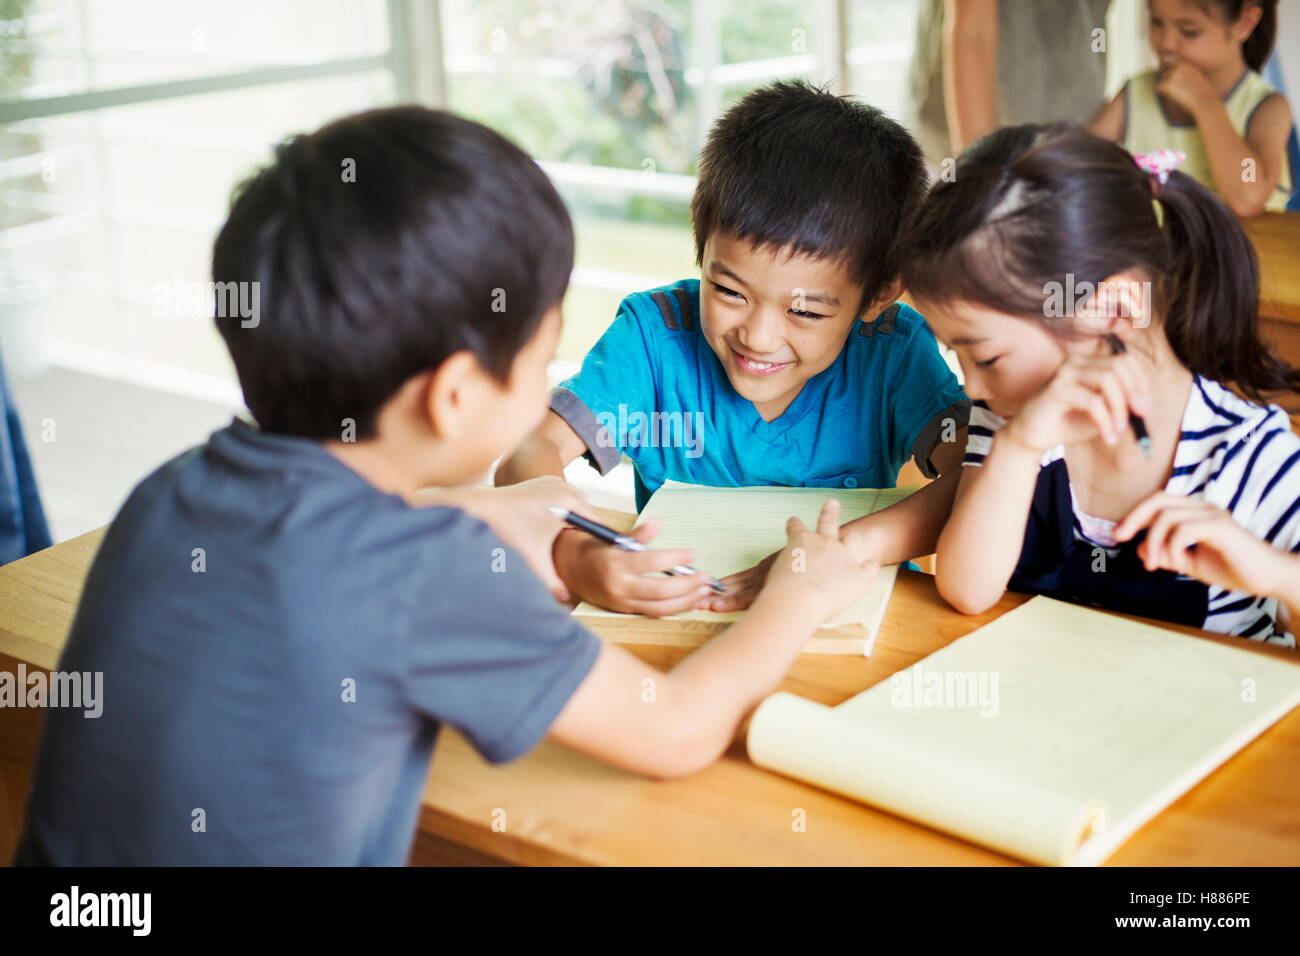 A group of children in a classroom, working together, boys and girls. Stock Photo